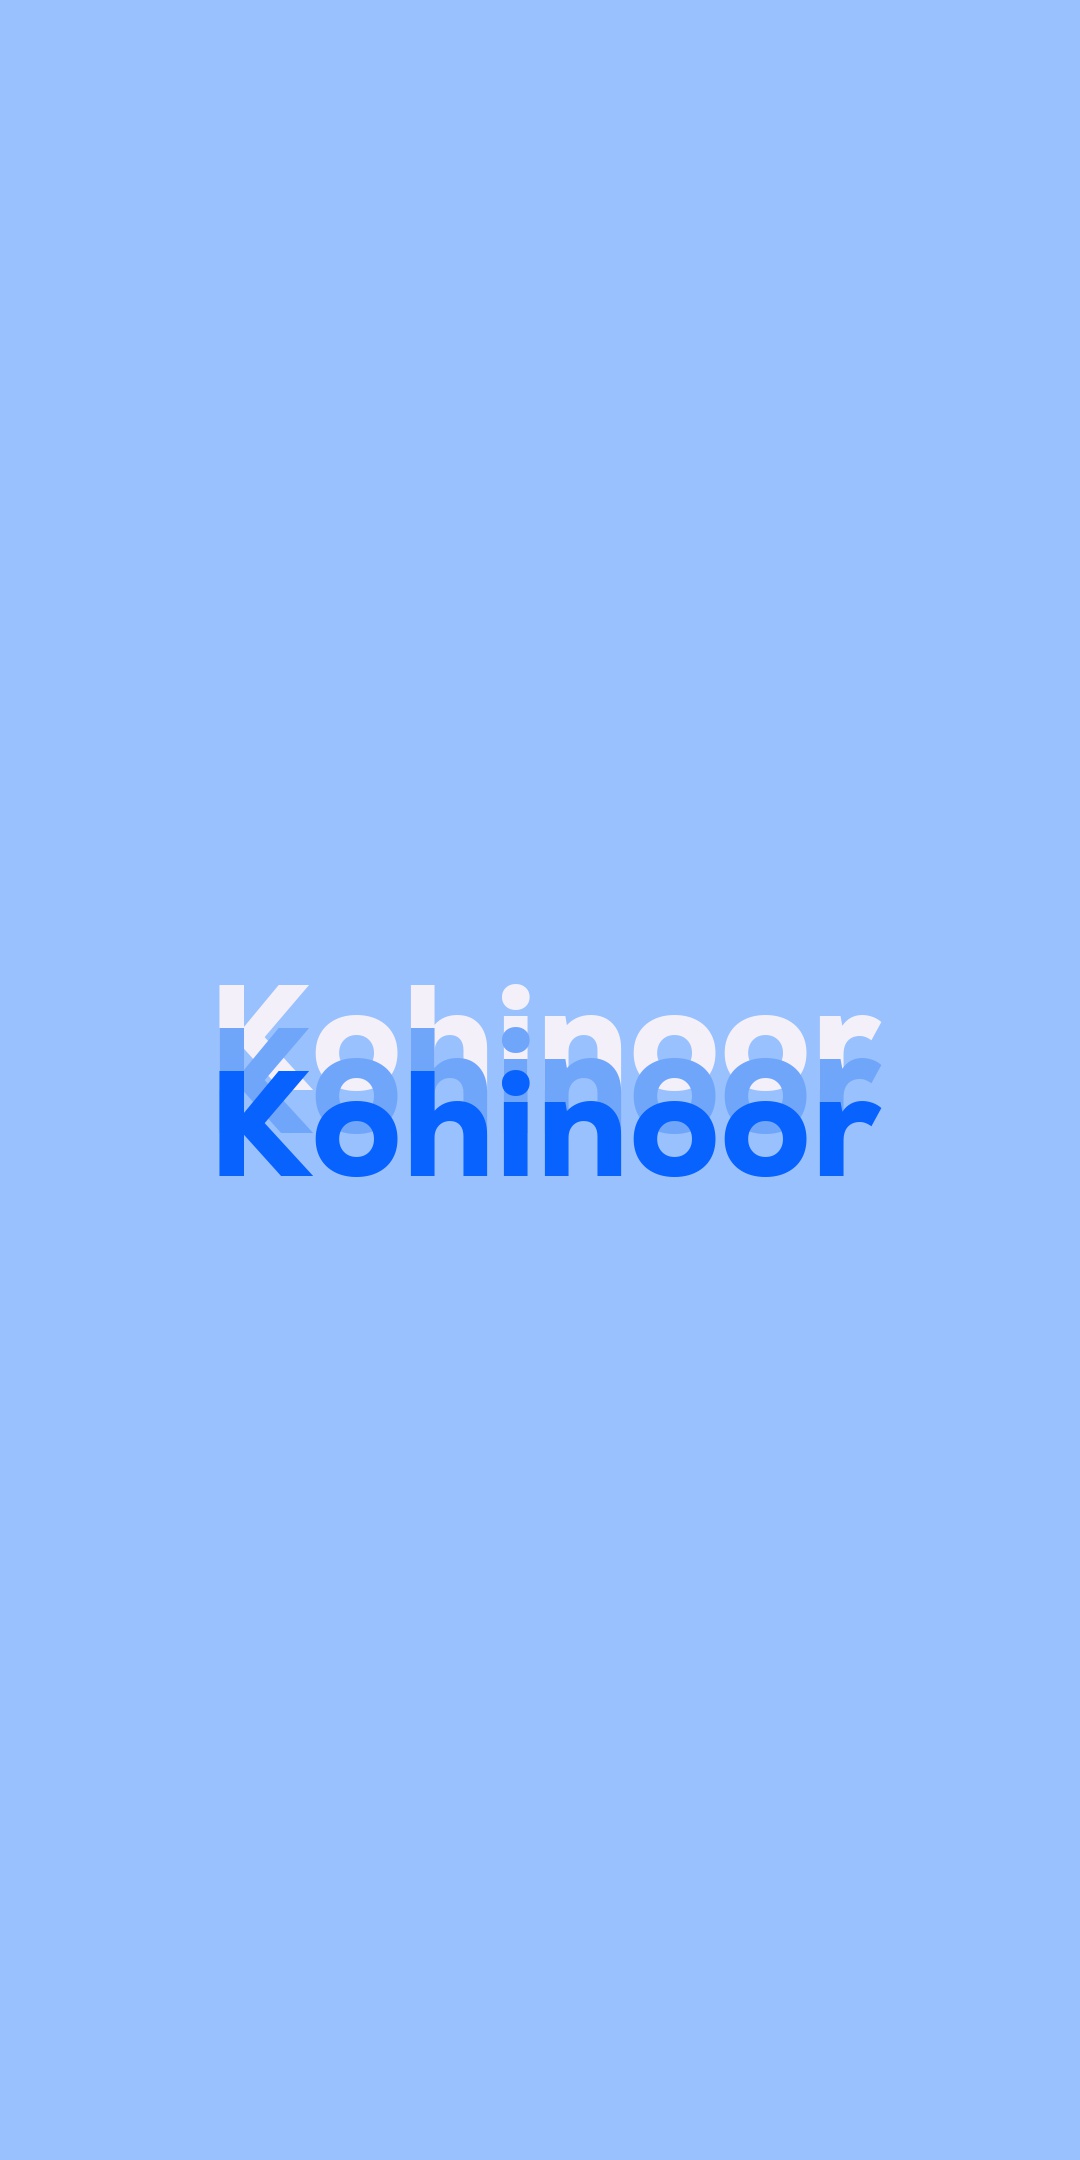 Celebrating 38 years of Kohinoor's Legacy with Pay On Delivery